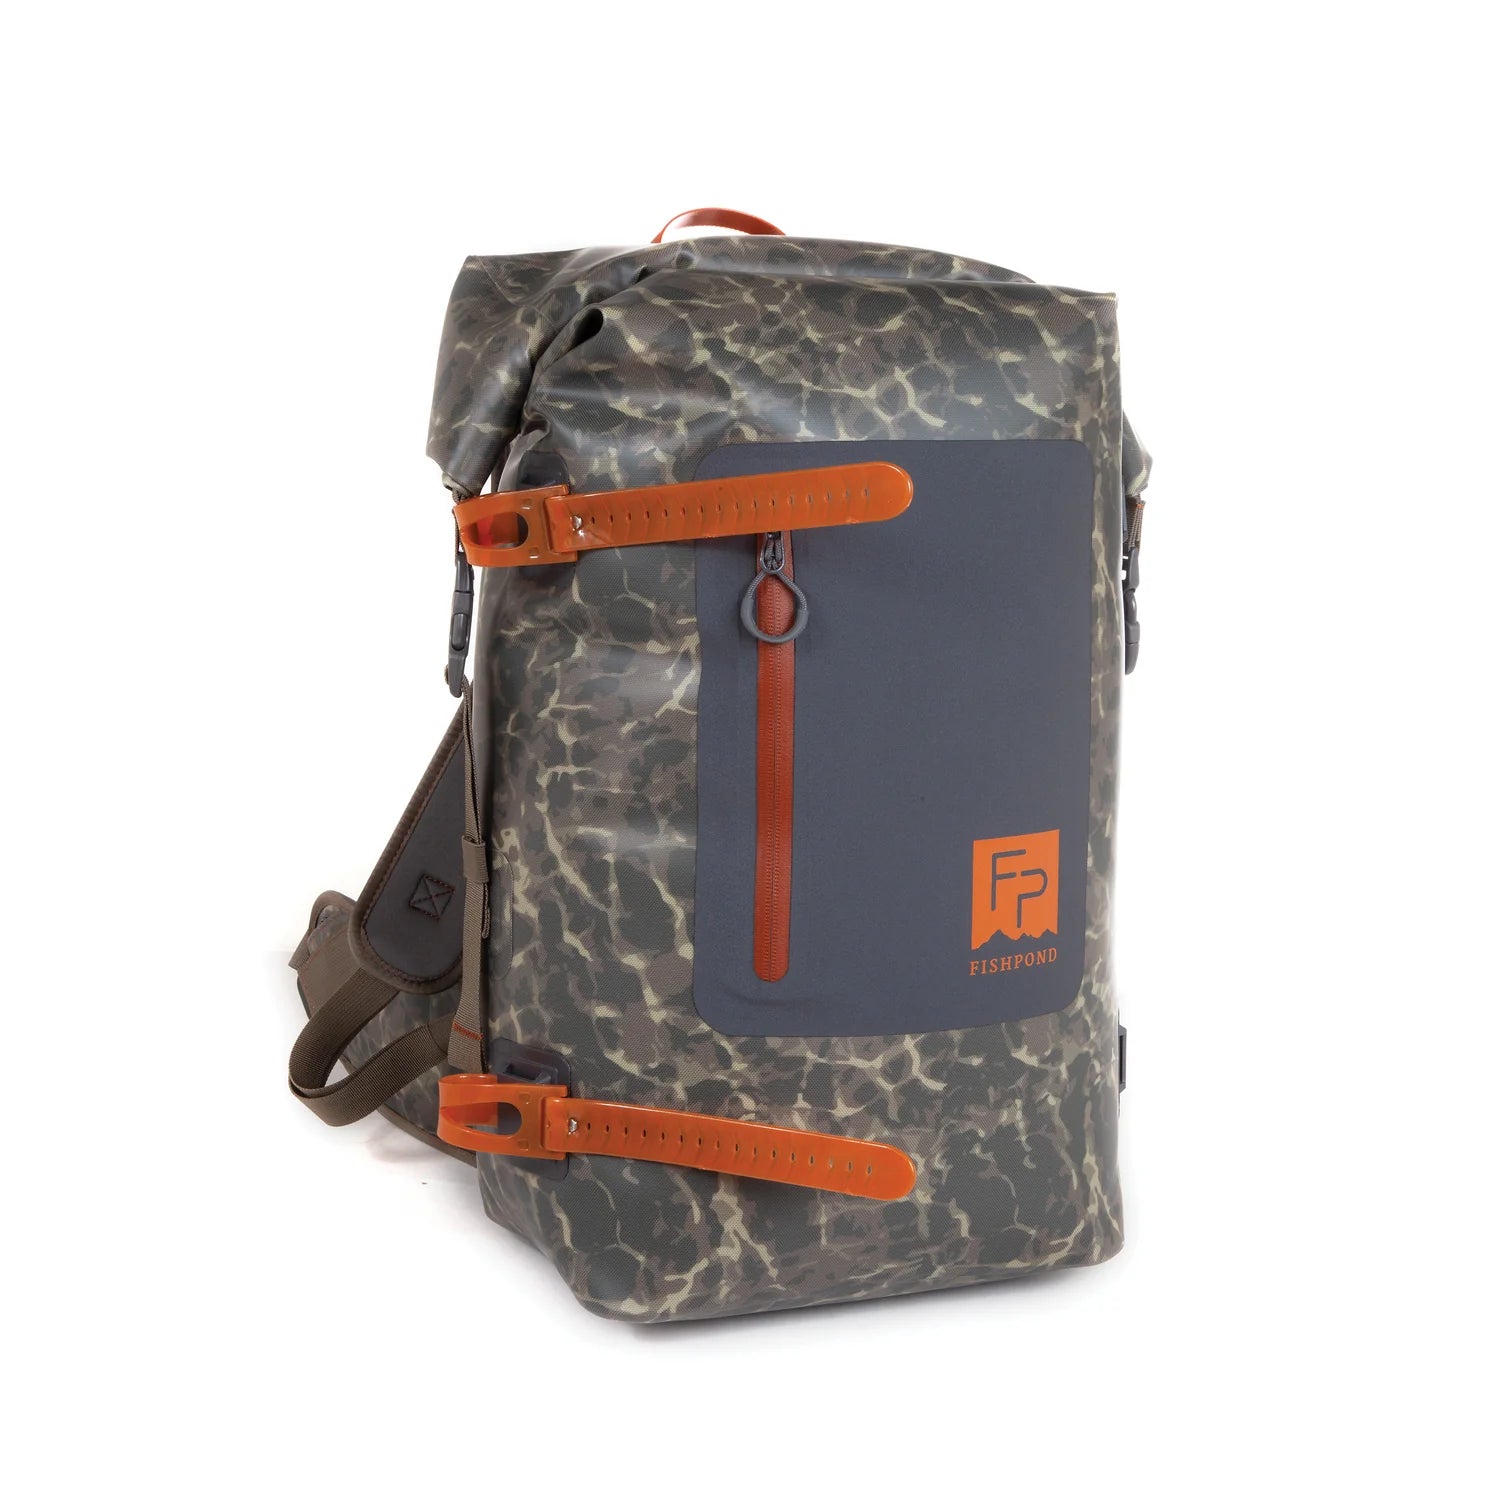 Fishpond Wind River Roll Top Backpack - Eco